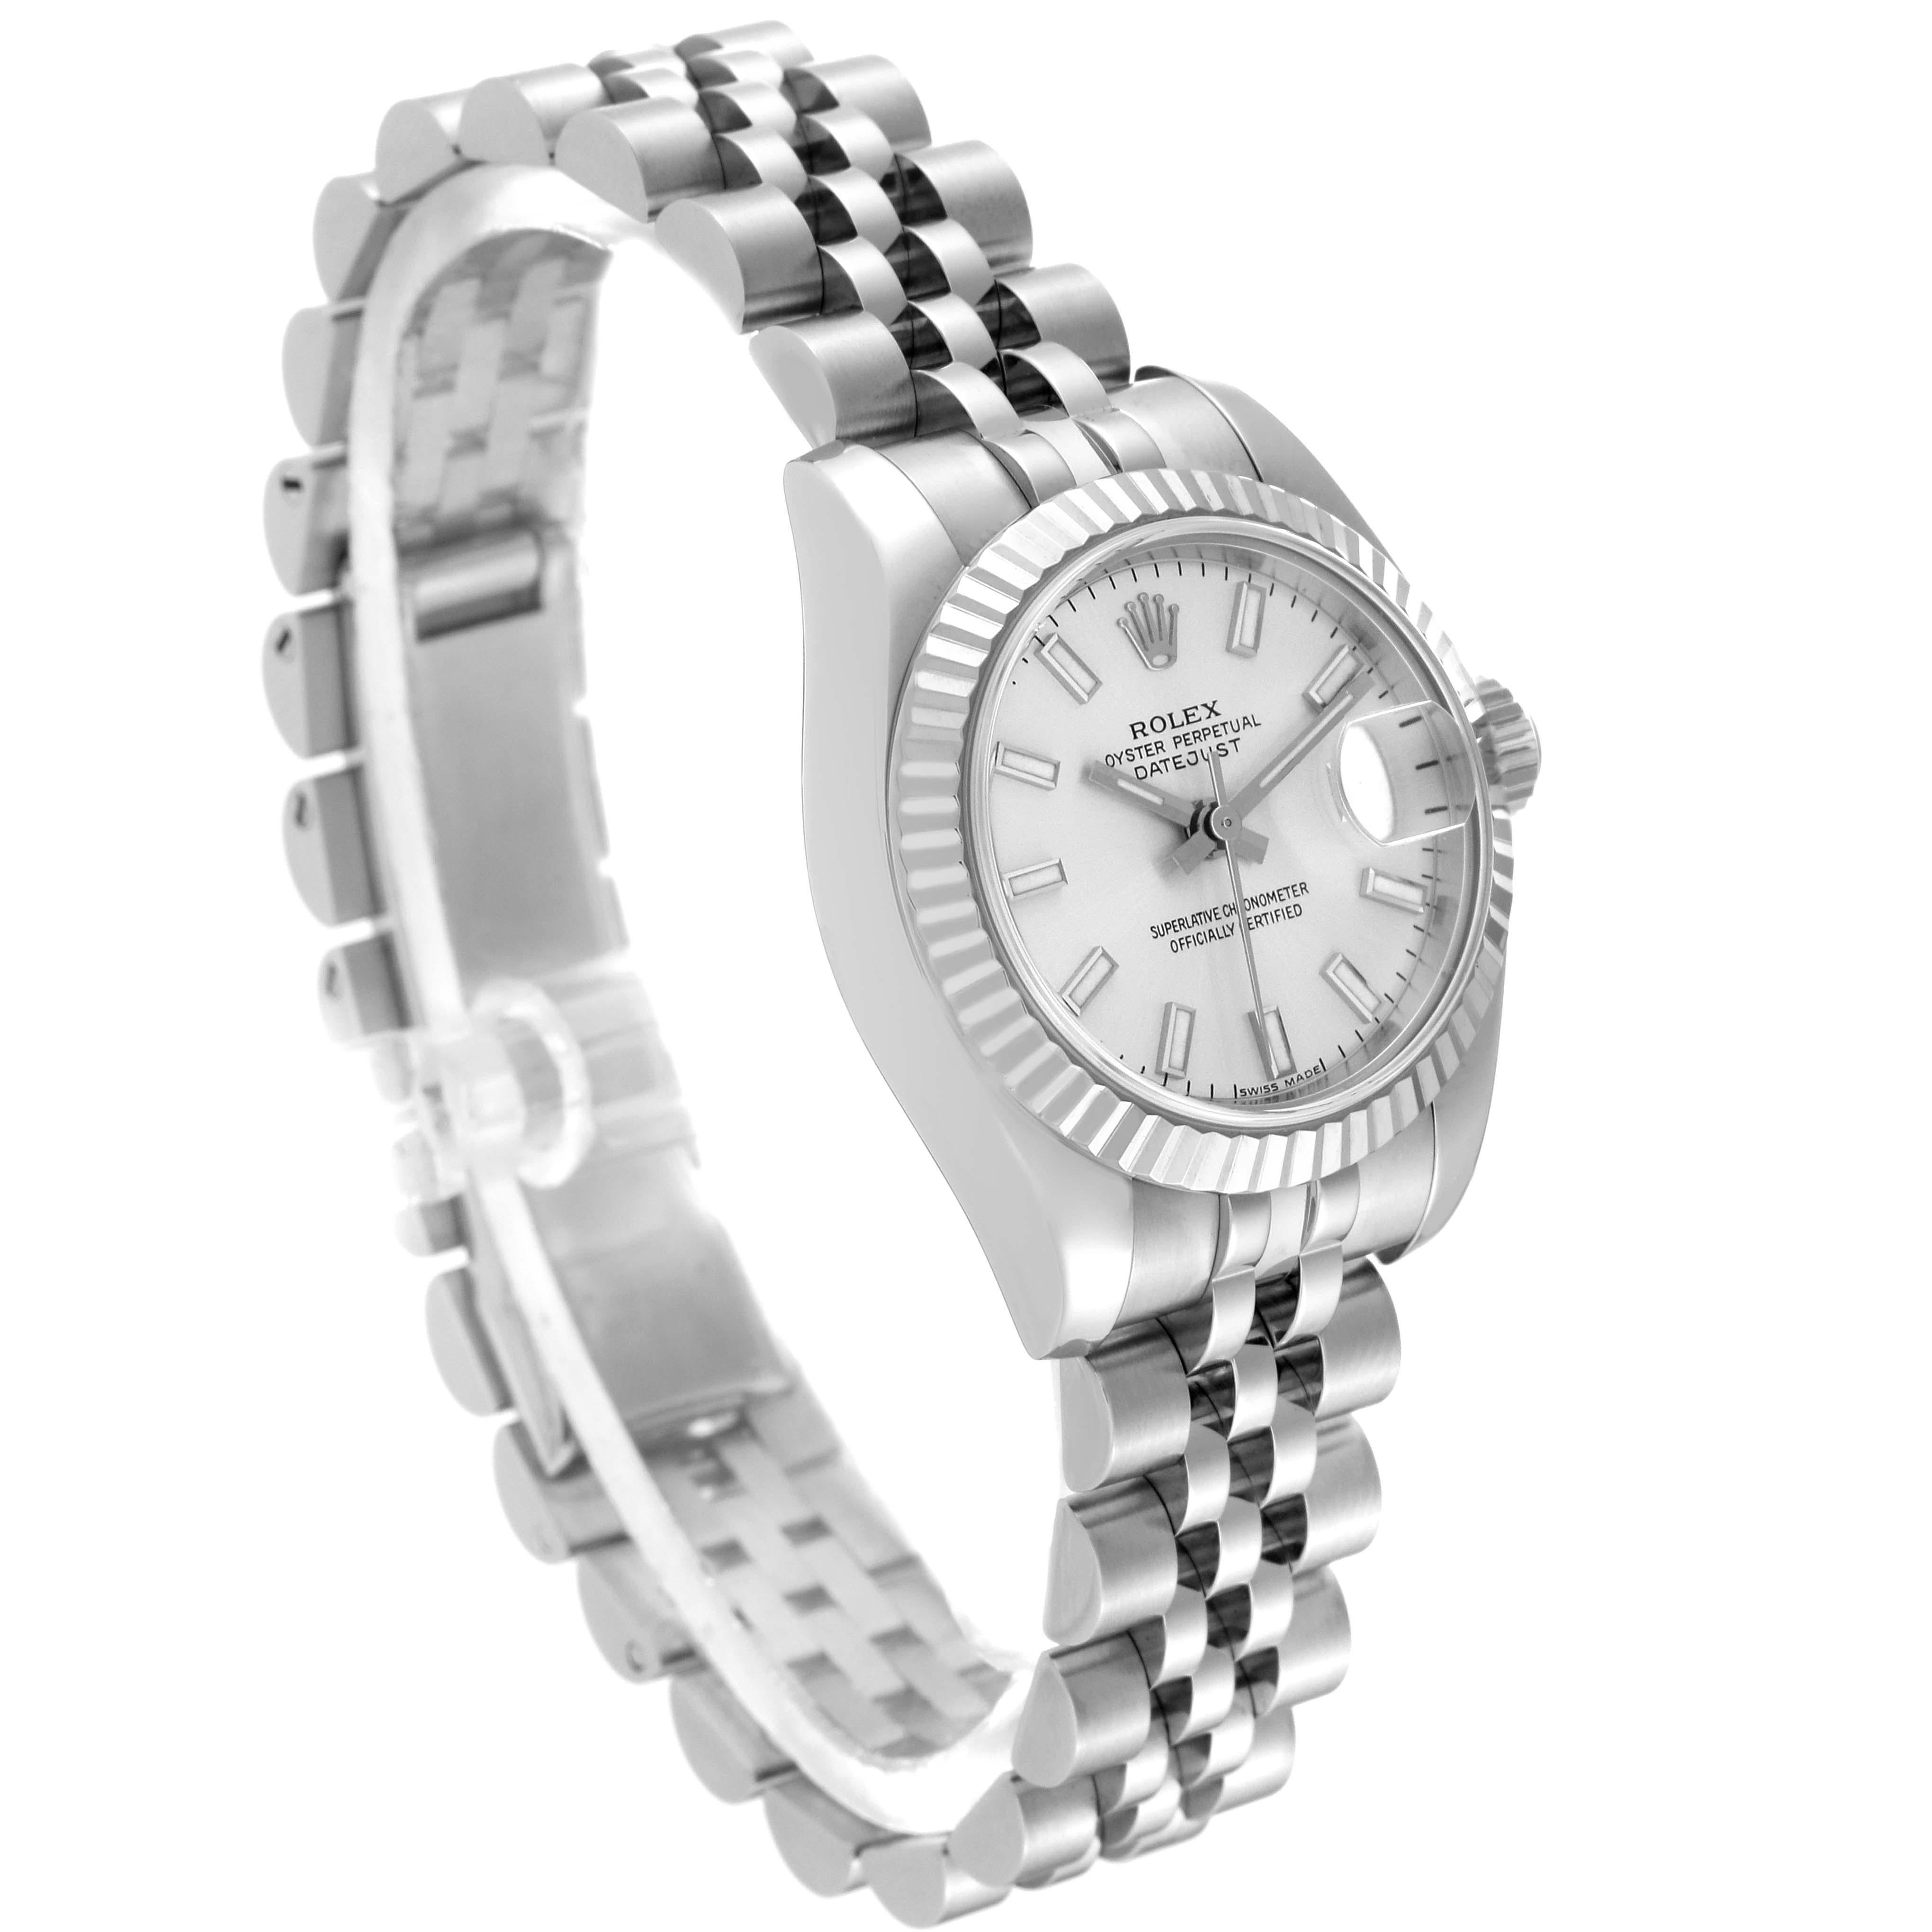 Rolex Datejust Steel White Gold Silver Dial Ladies Watch 179174 Box Papers en vente 8